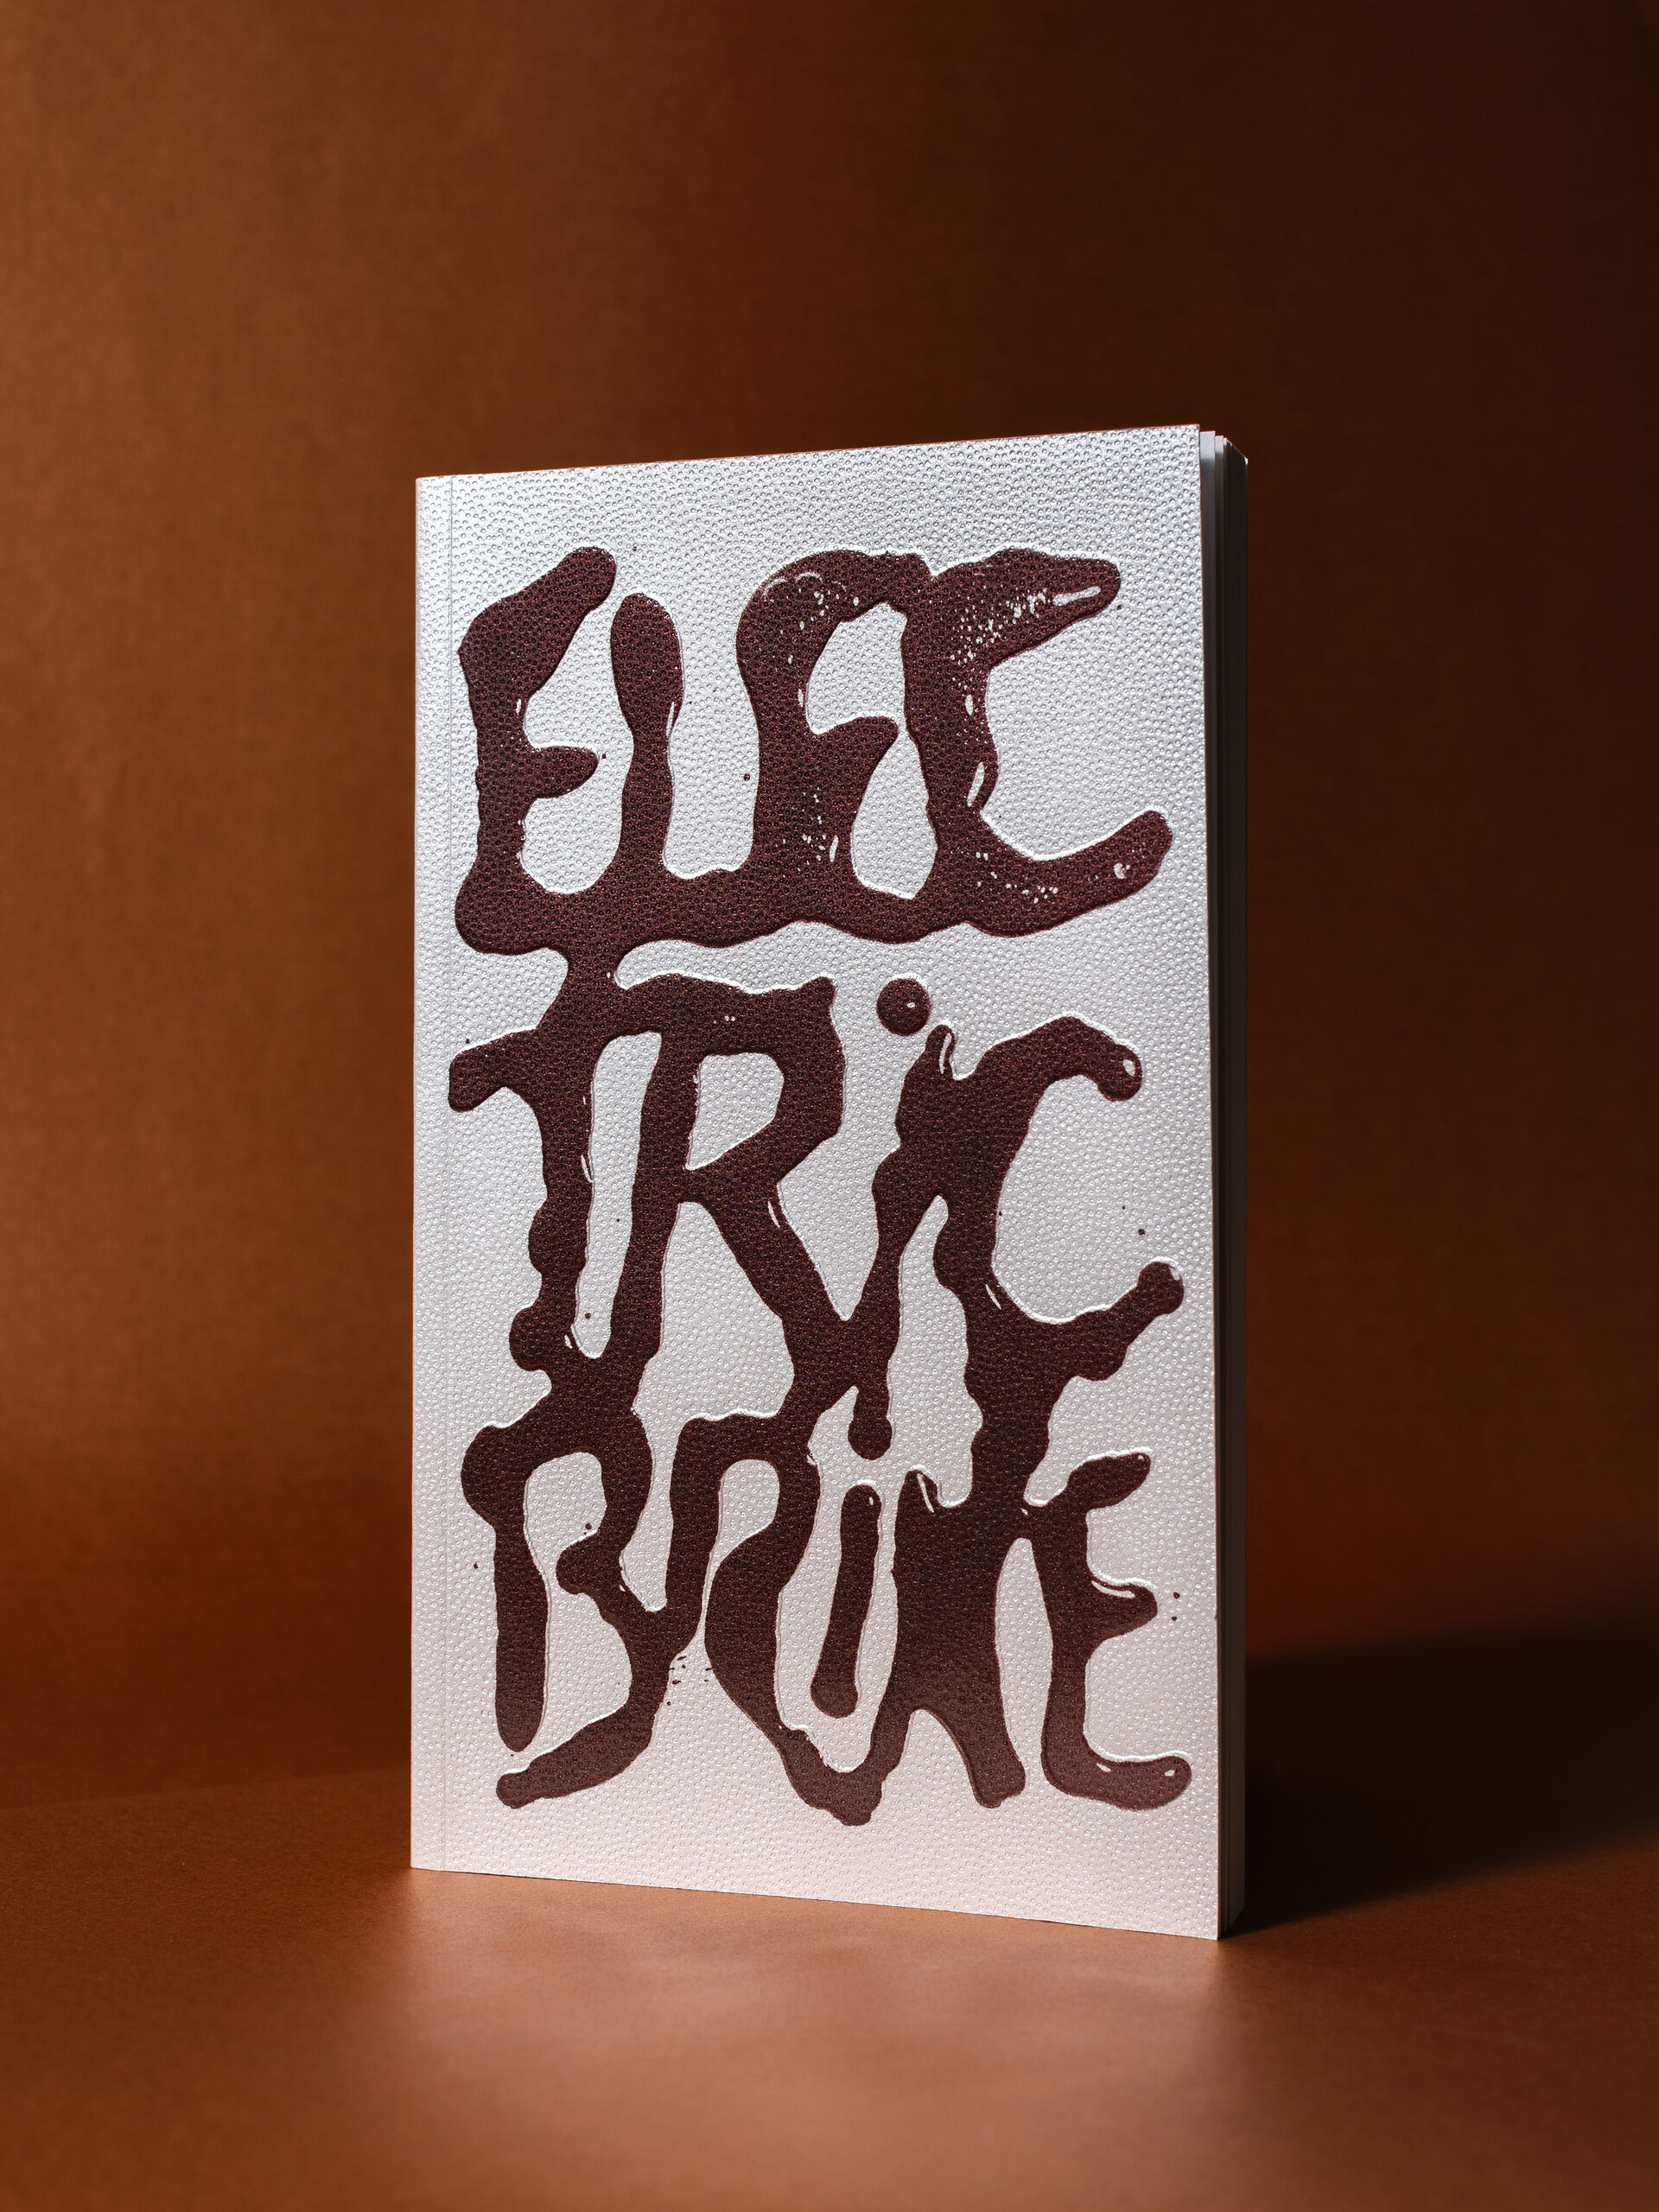 The book titled Electric Brine standing against a brown background